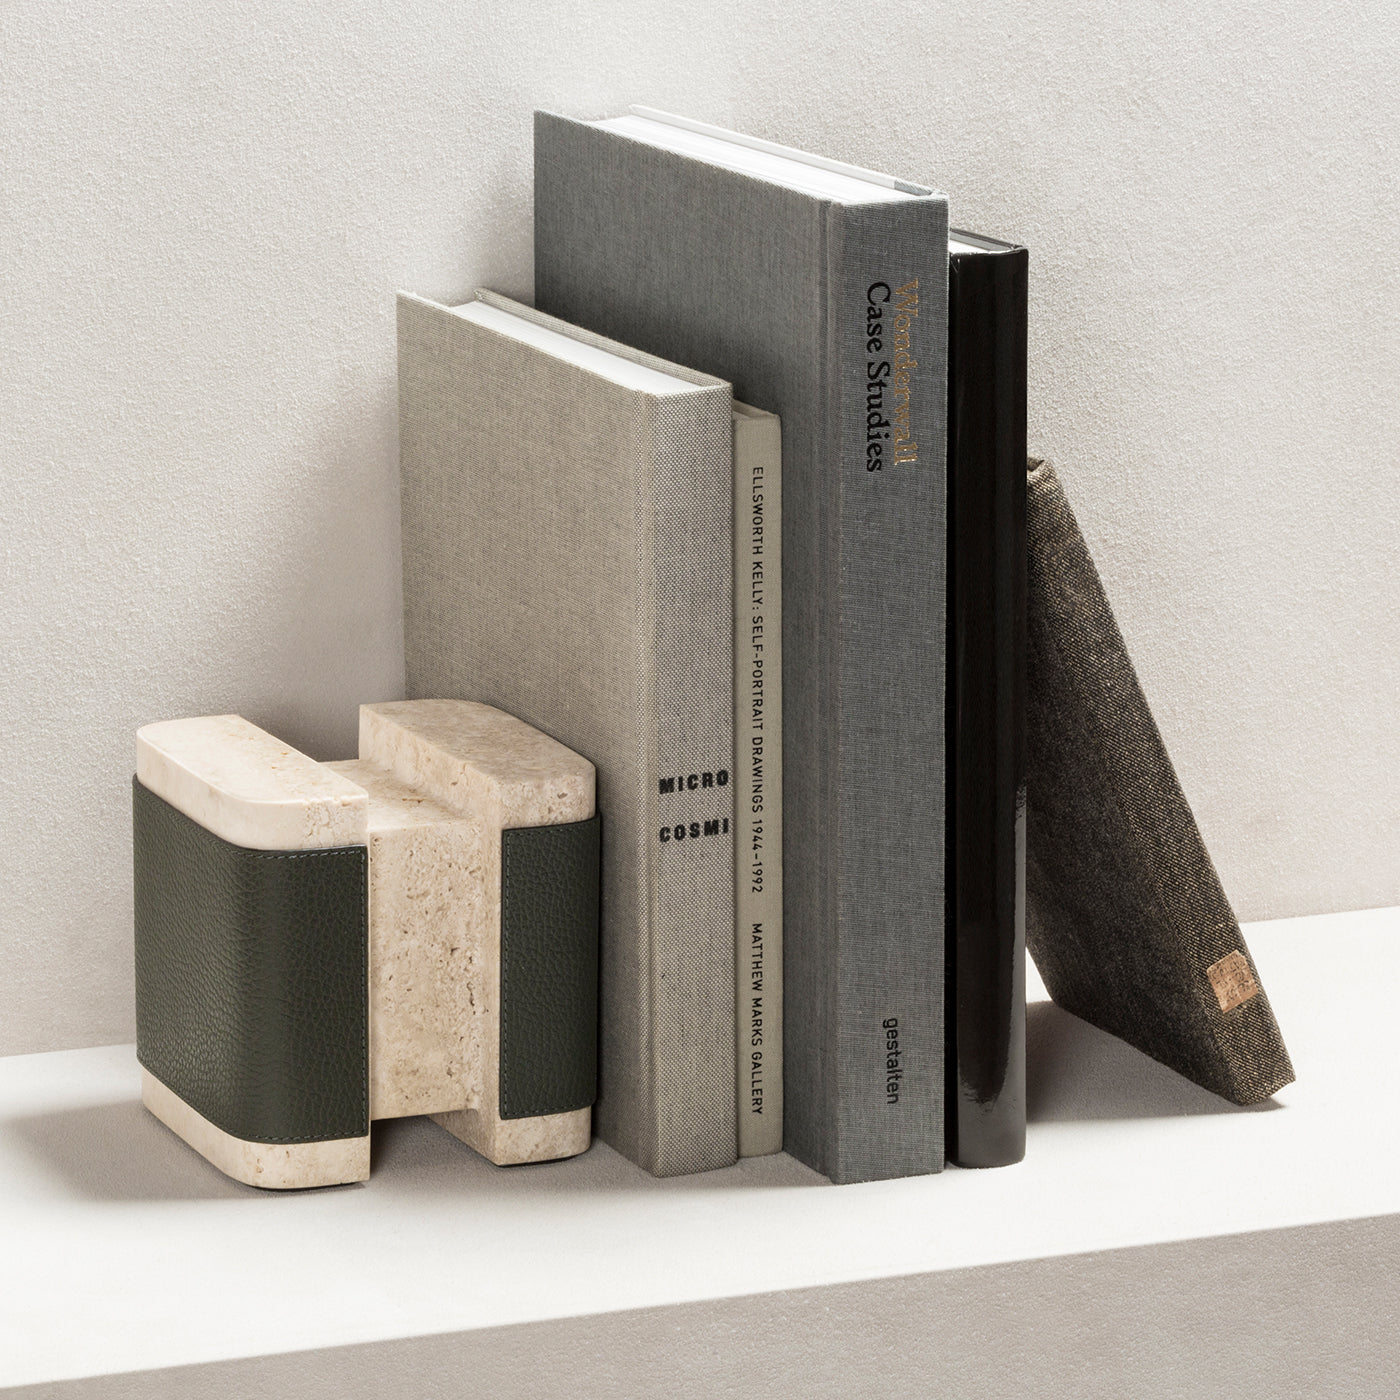 LLoyd Leather & Marble Bookend - Alternative view 1